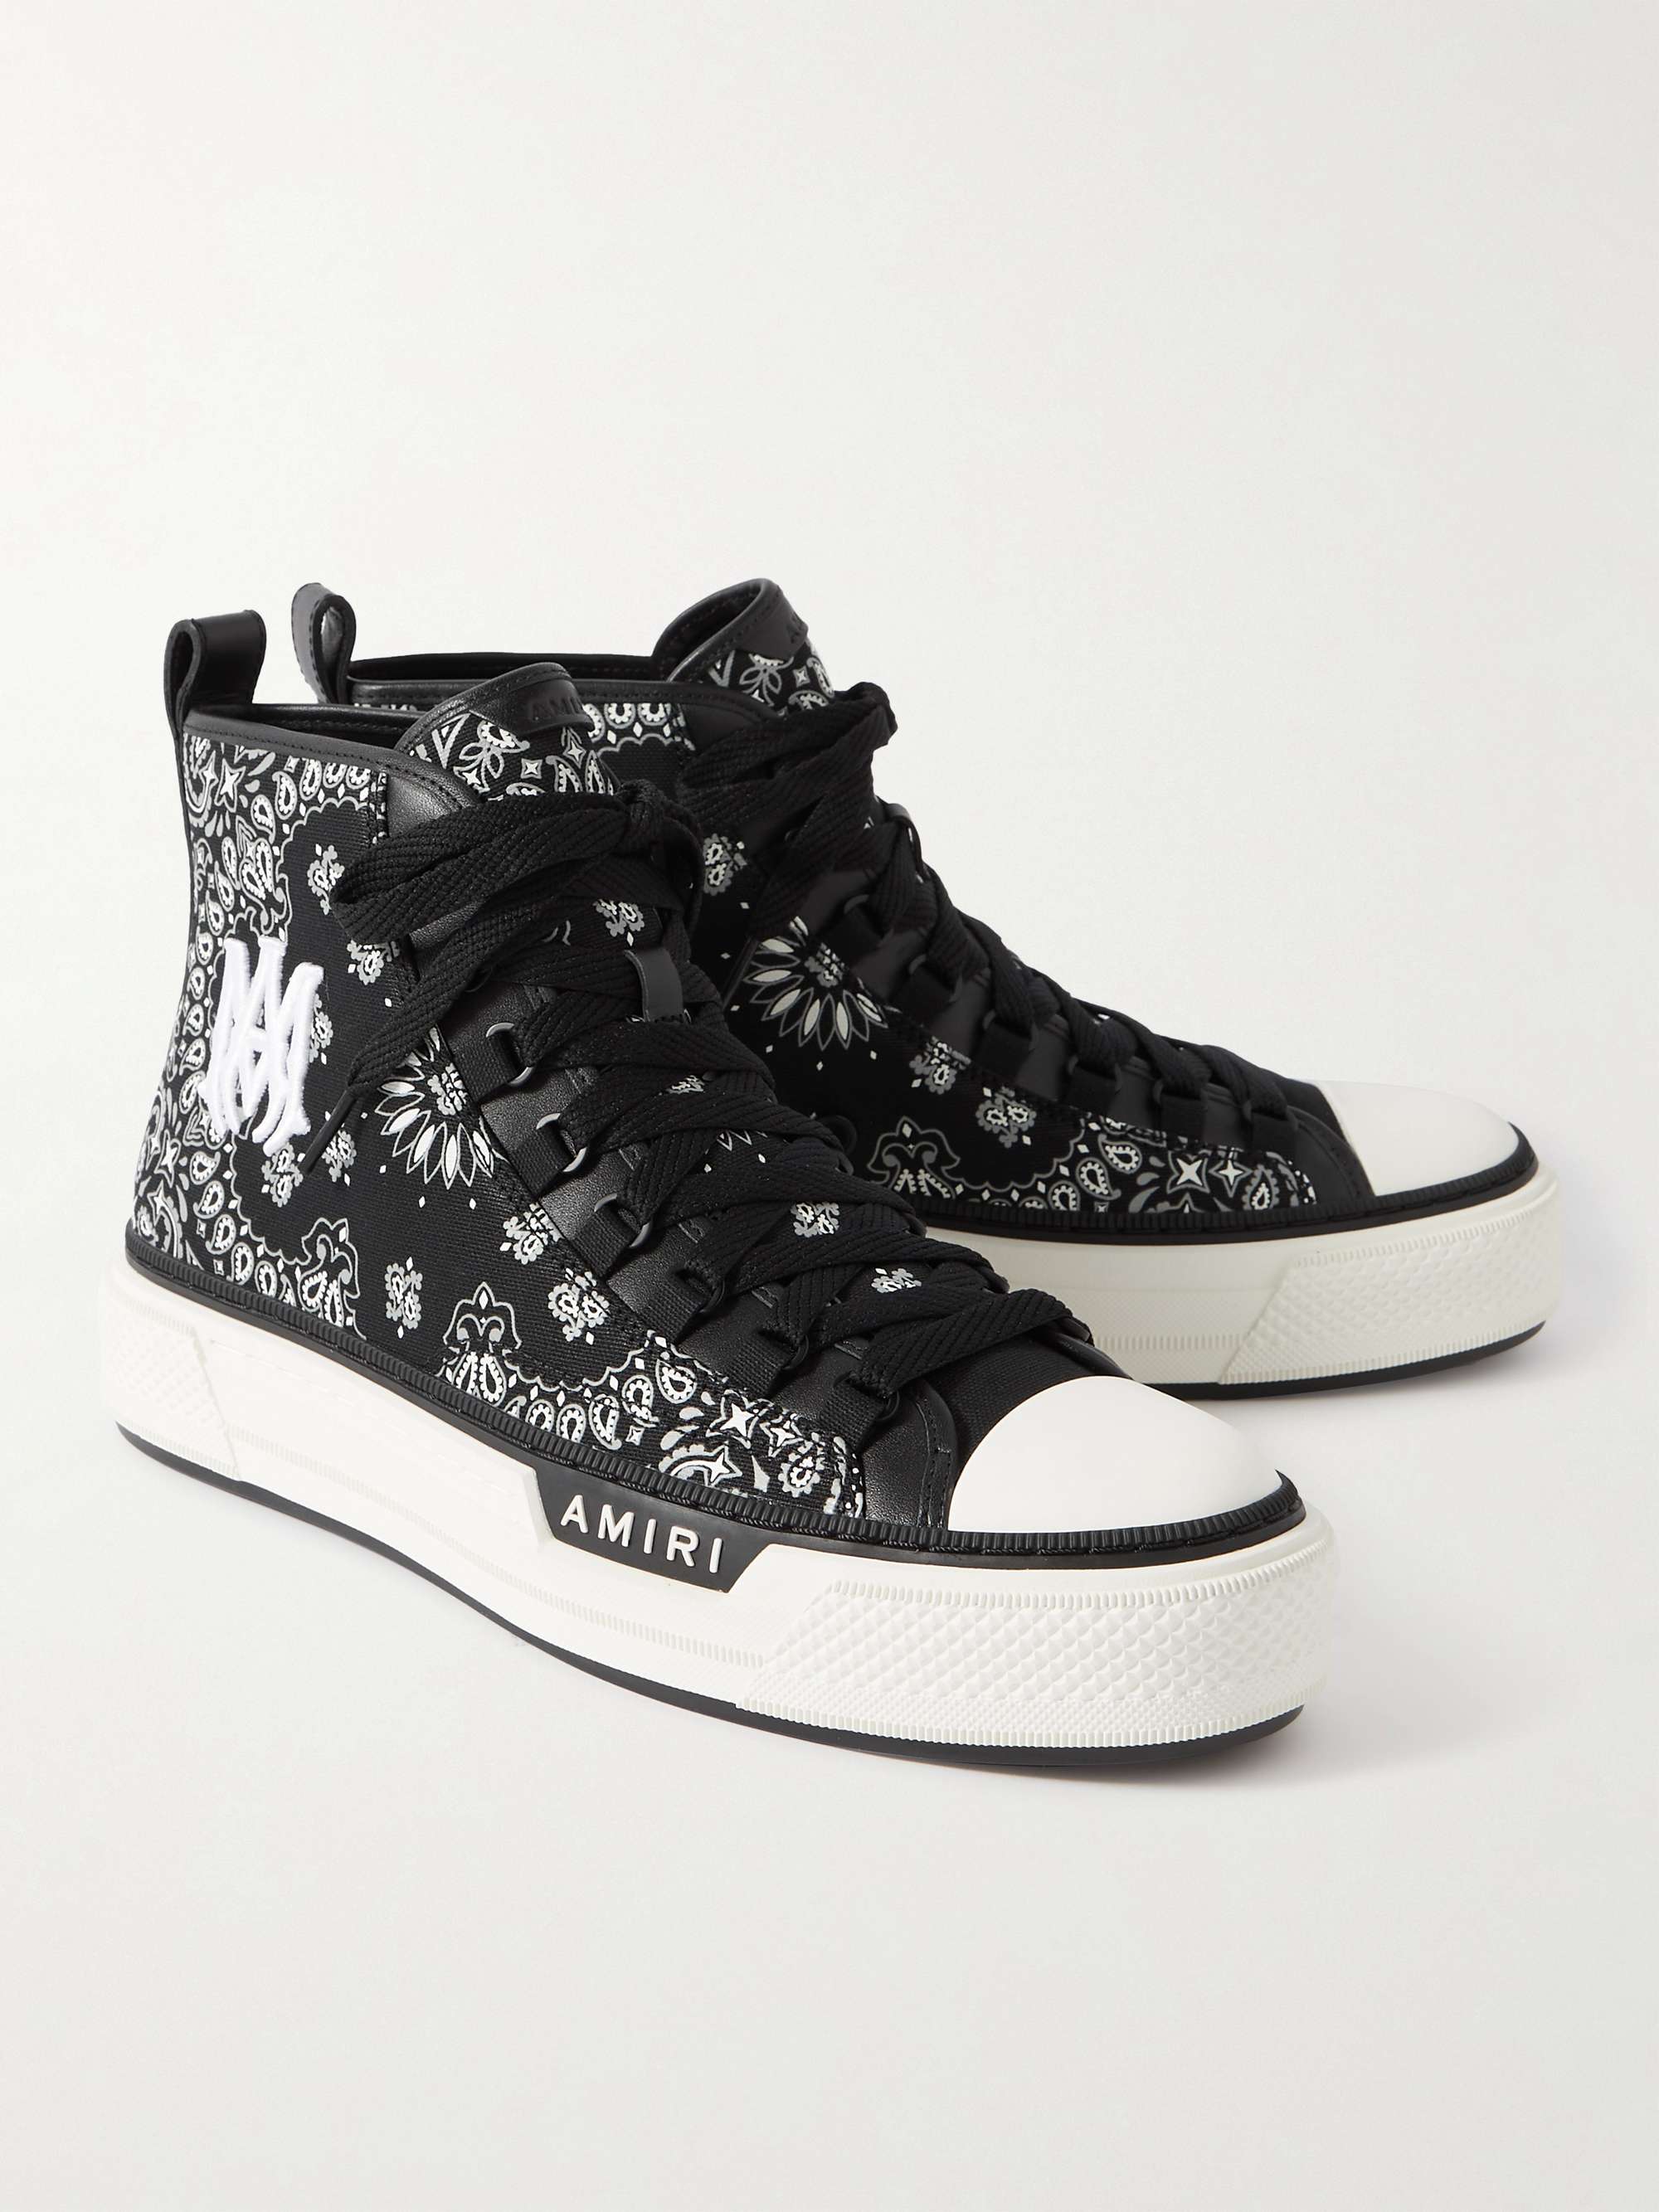 AMIRI Leather-Trimmed Paisley-Print Canvas High-Top Sneakers